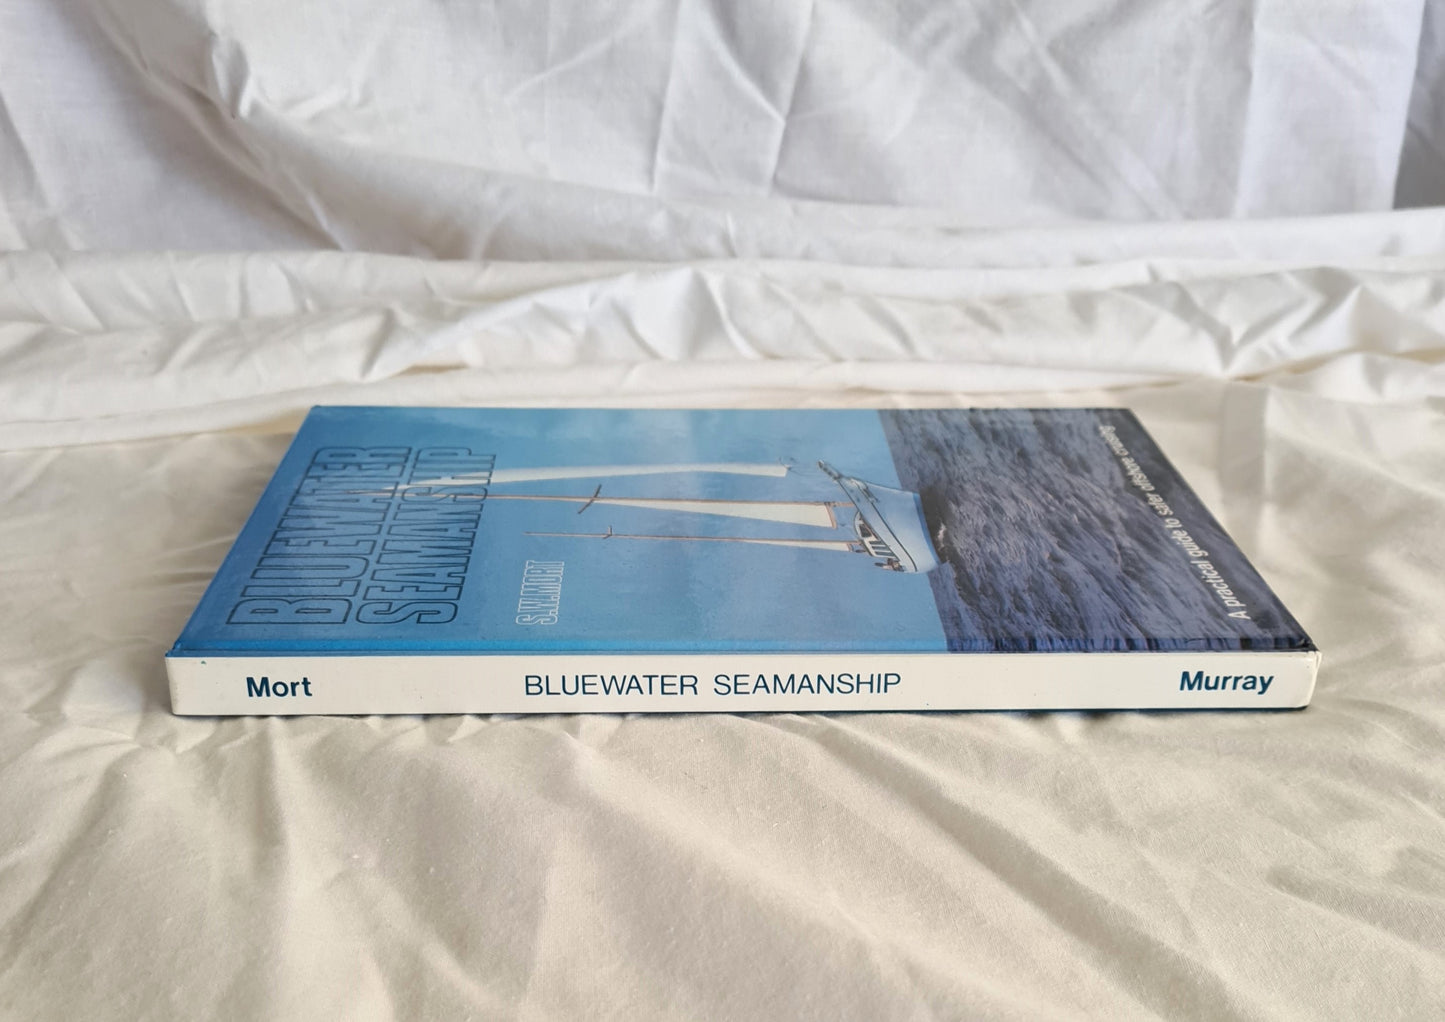 Bluewater Seamanship by S. W. Mort